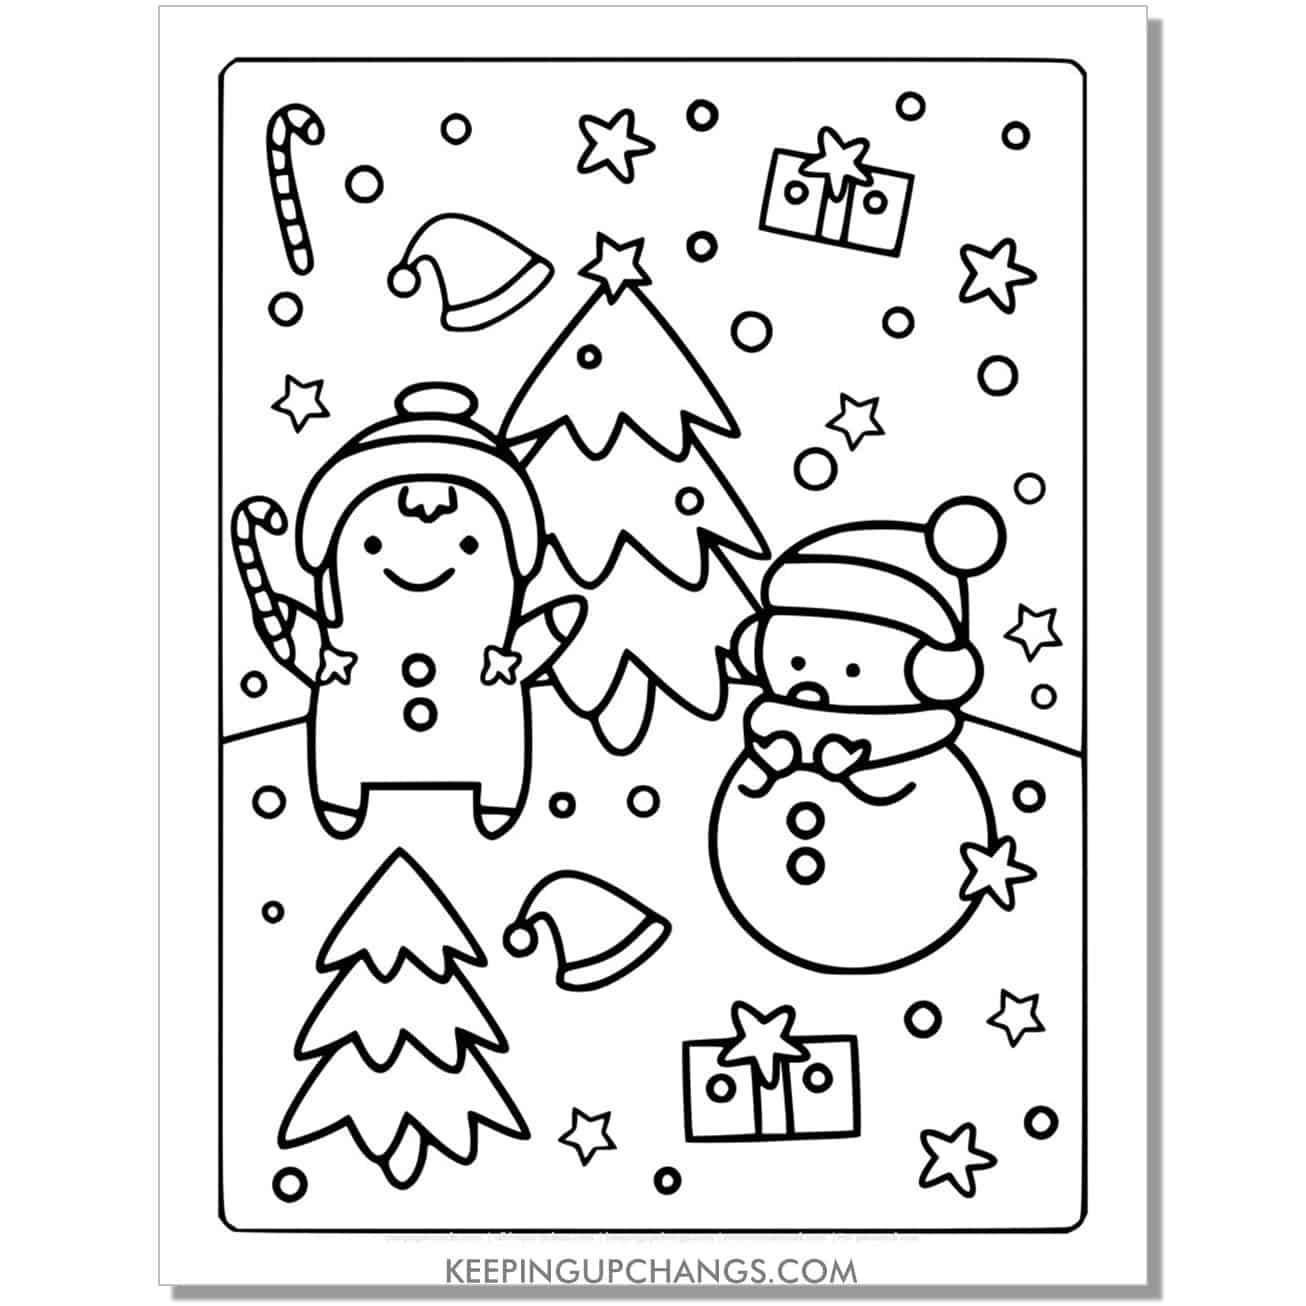 https://keepingupchangs.com/wp-content/uploads/free-full-size-snowman-gingerbread-christmas-tree-coloring-page-colouring-sheet.jpg